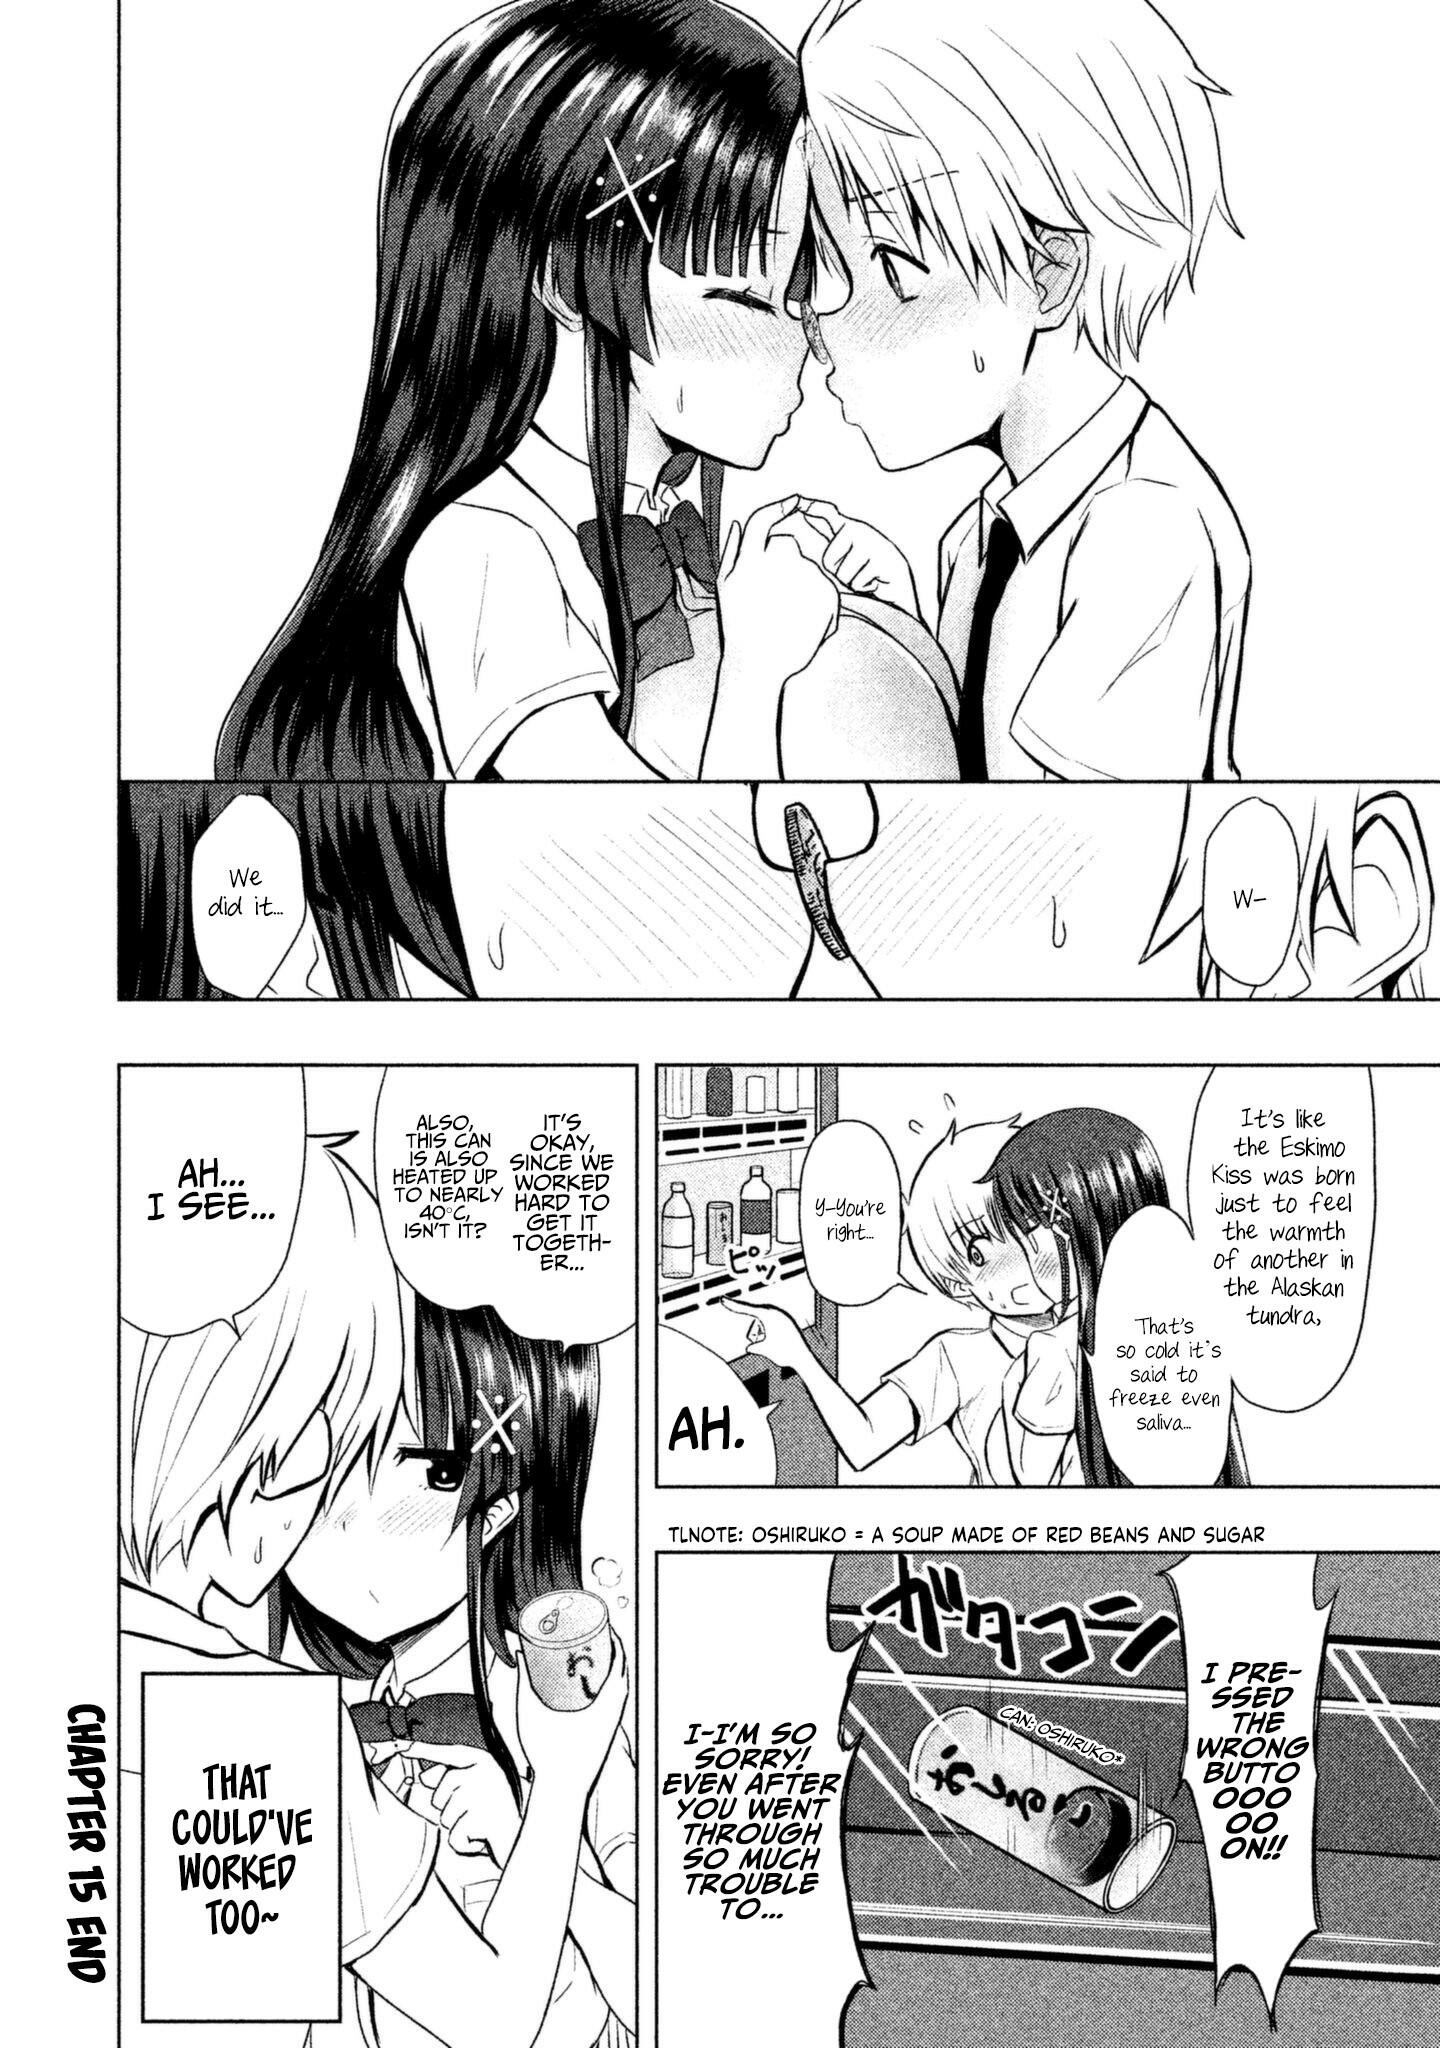 A Girl Who Is Very Well-Informed About Weird Knowledge, Takayukashiki Souko-San Chapter 16: Adhesive page 9 - Mangakakalots.com